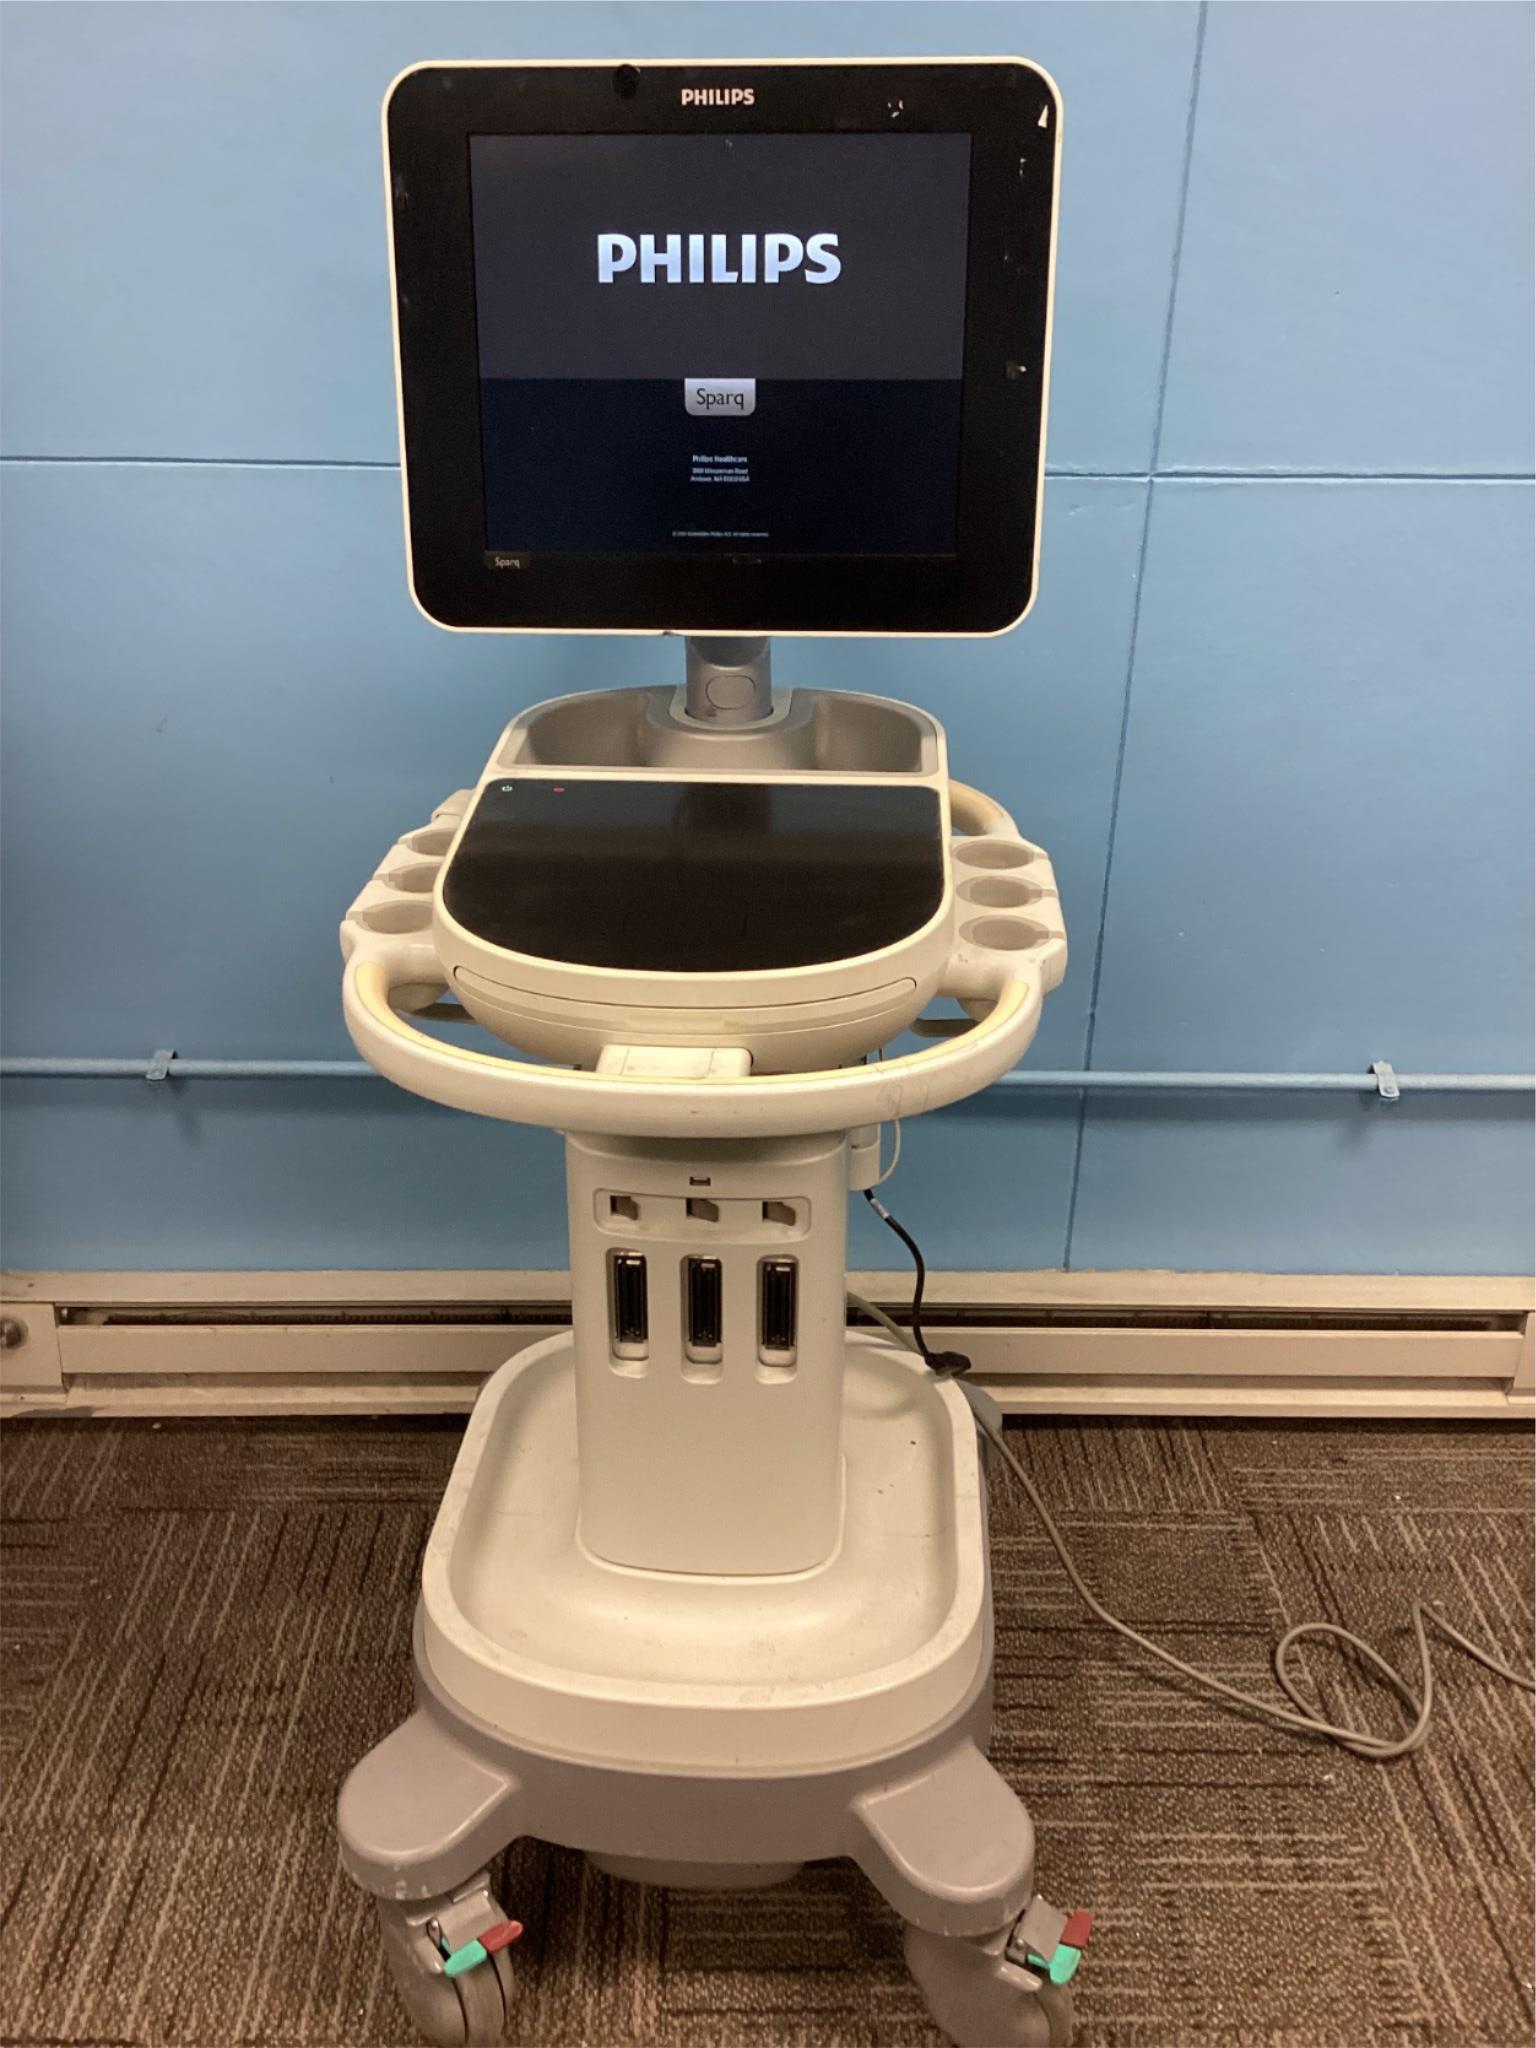 Philips Sparq Diagnostic Ultrasound System  - 2016 DIAGNOSTIC ULTRASOUND MACHINES FOR SALE